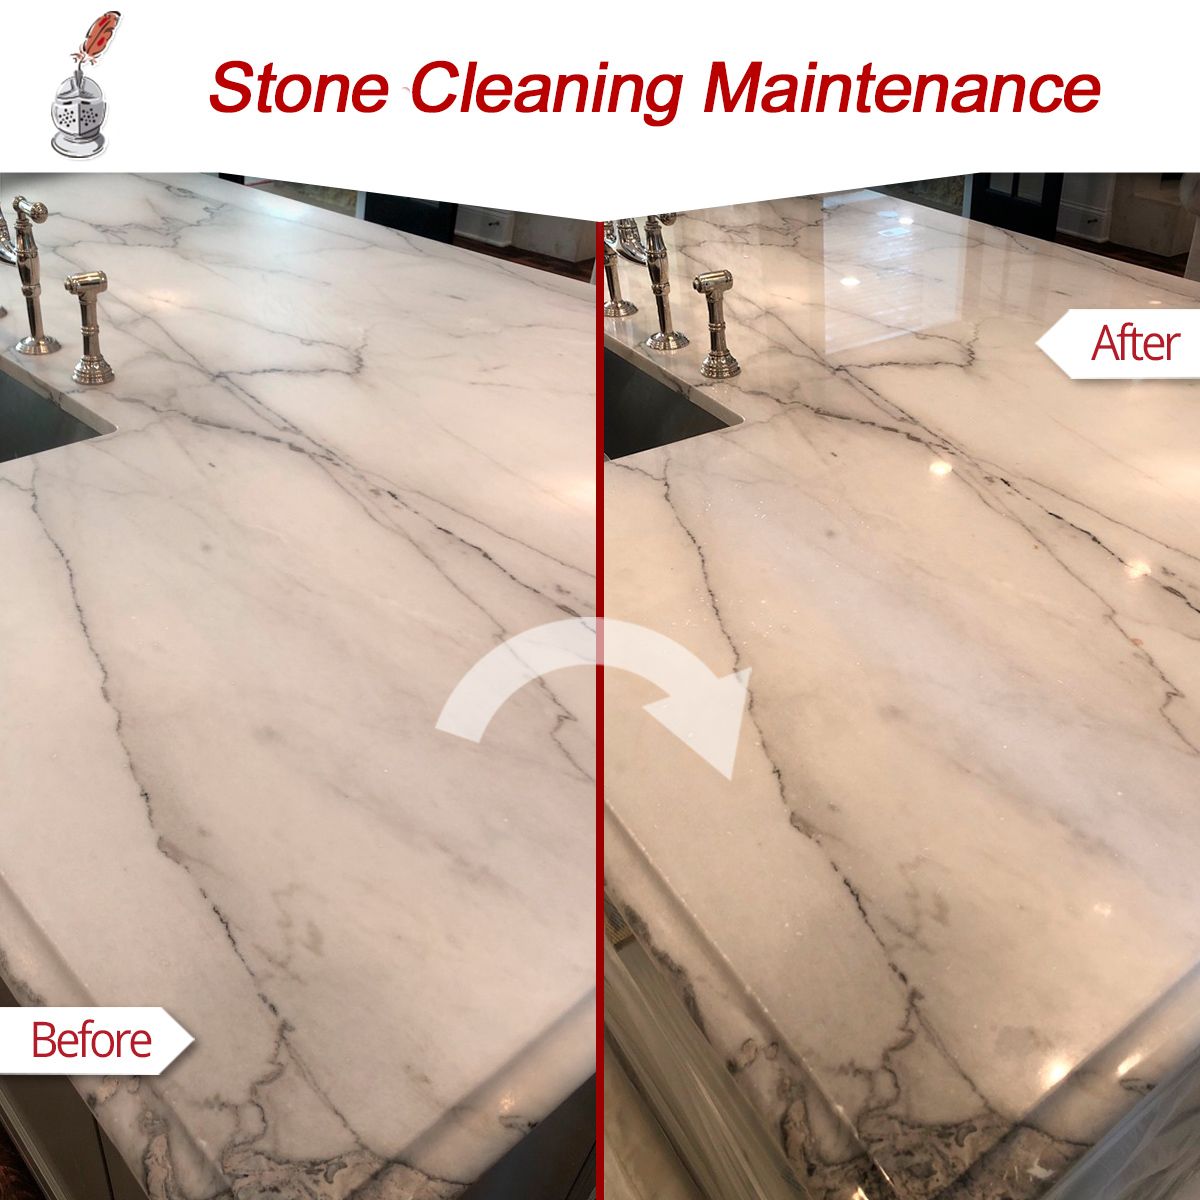 Stone Cleaning Maintenance